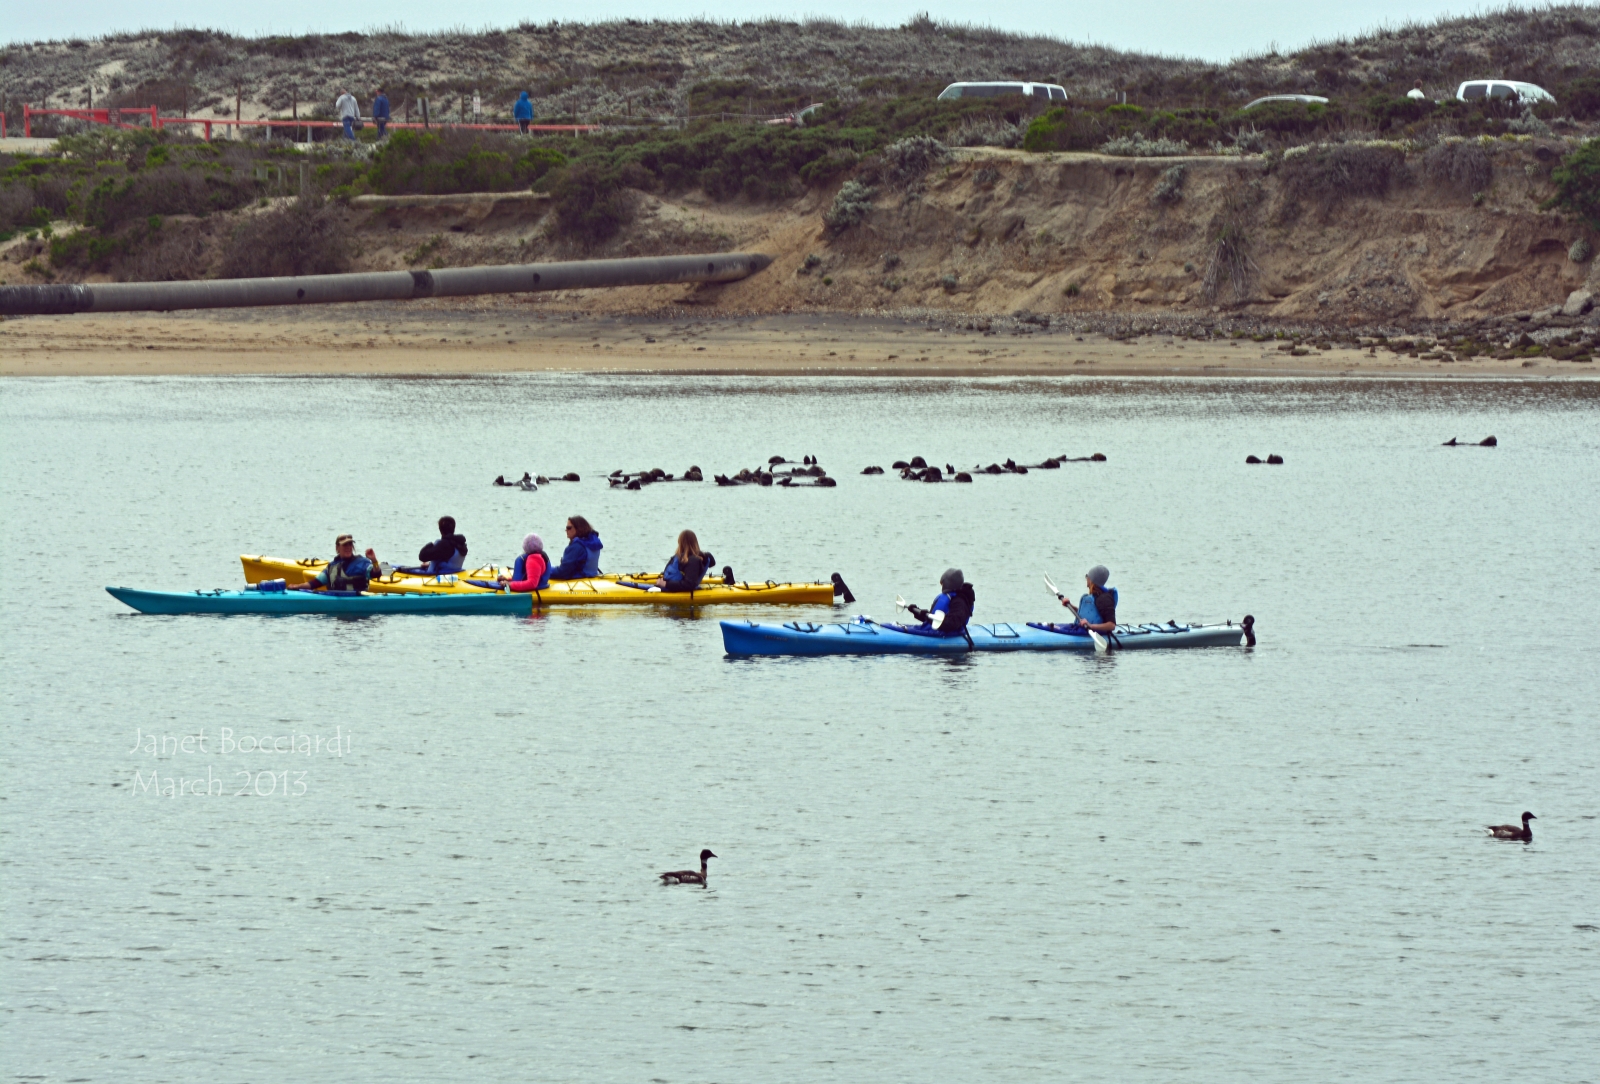 Kayaks out looking at otters at Moss Landing.